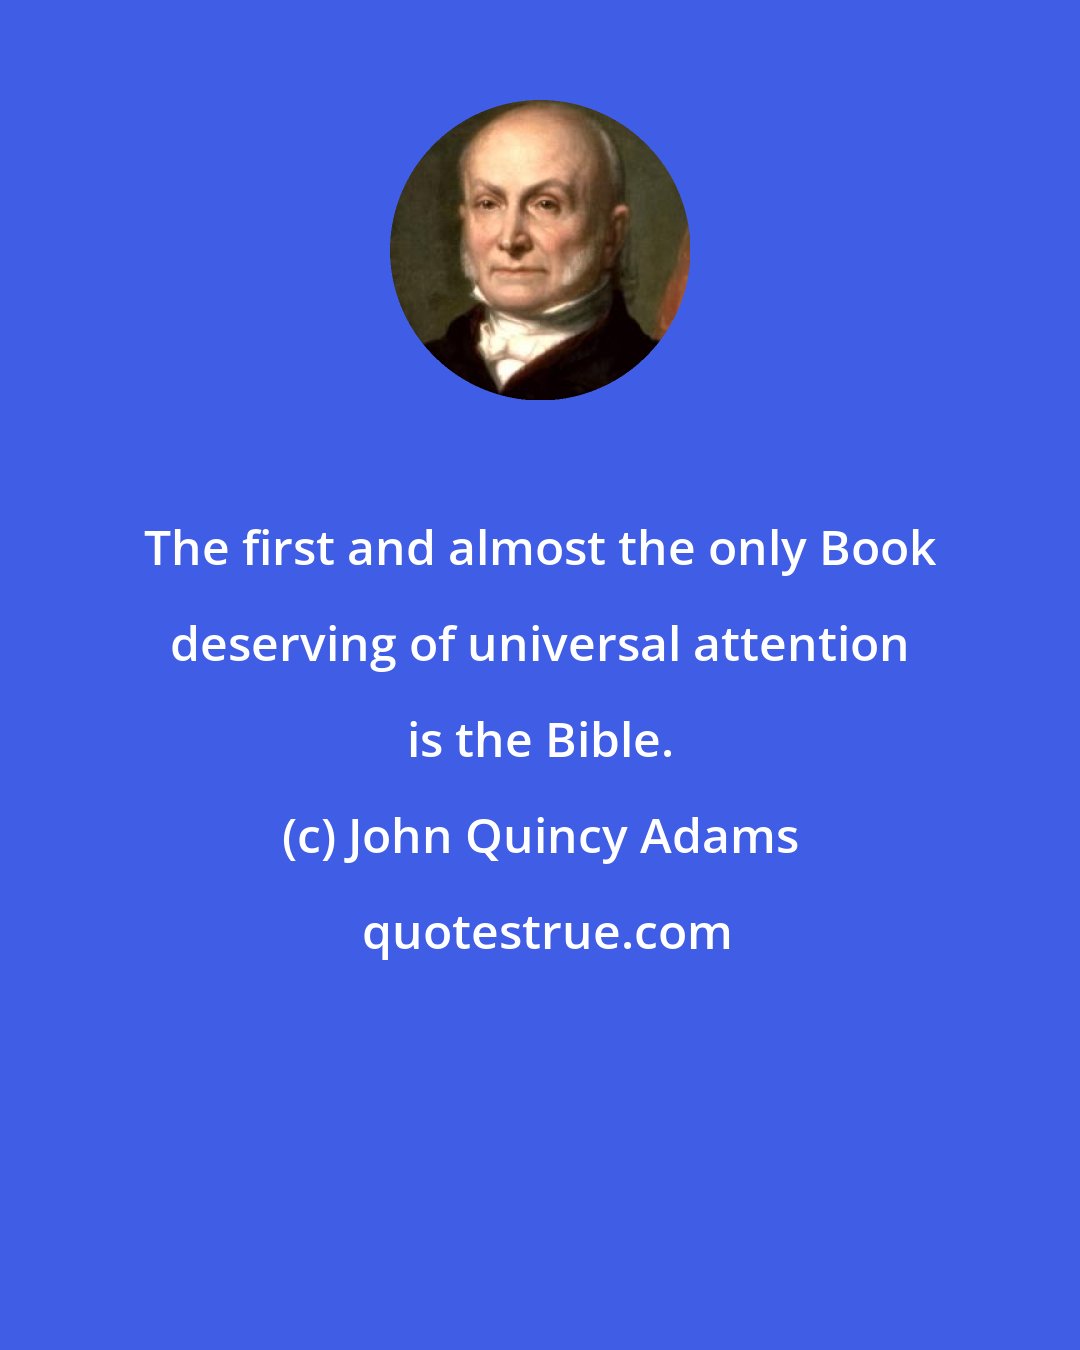 John Quincy Adams: The first and almost the only Book deserving of universal attention is the Bible.